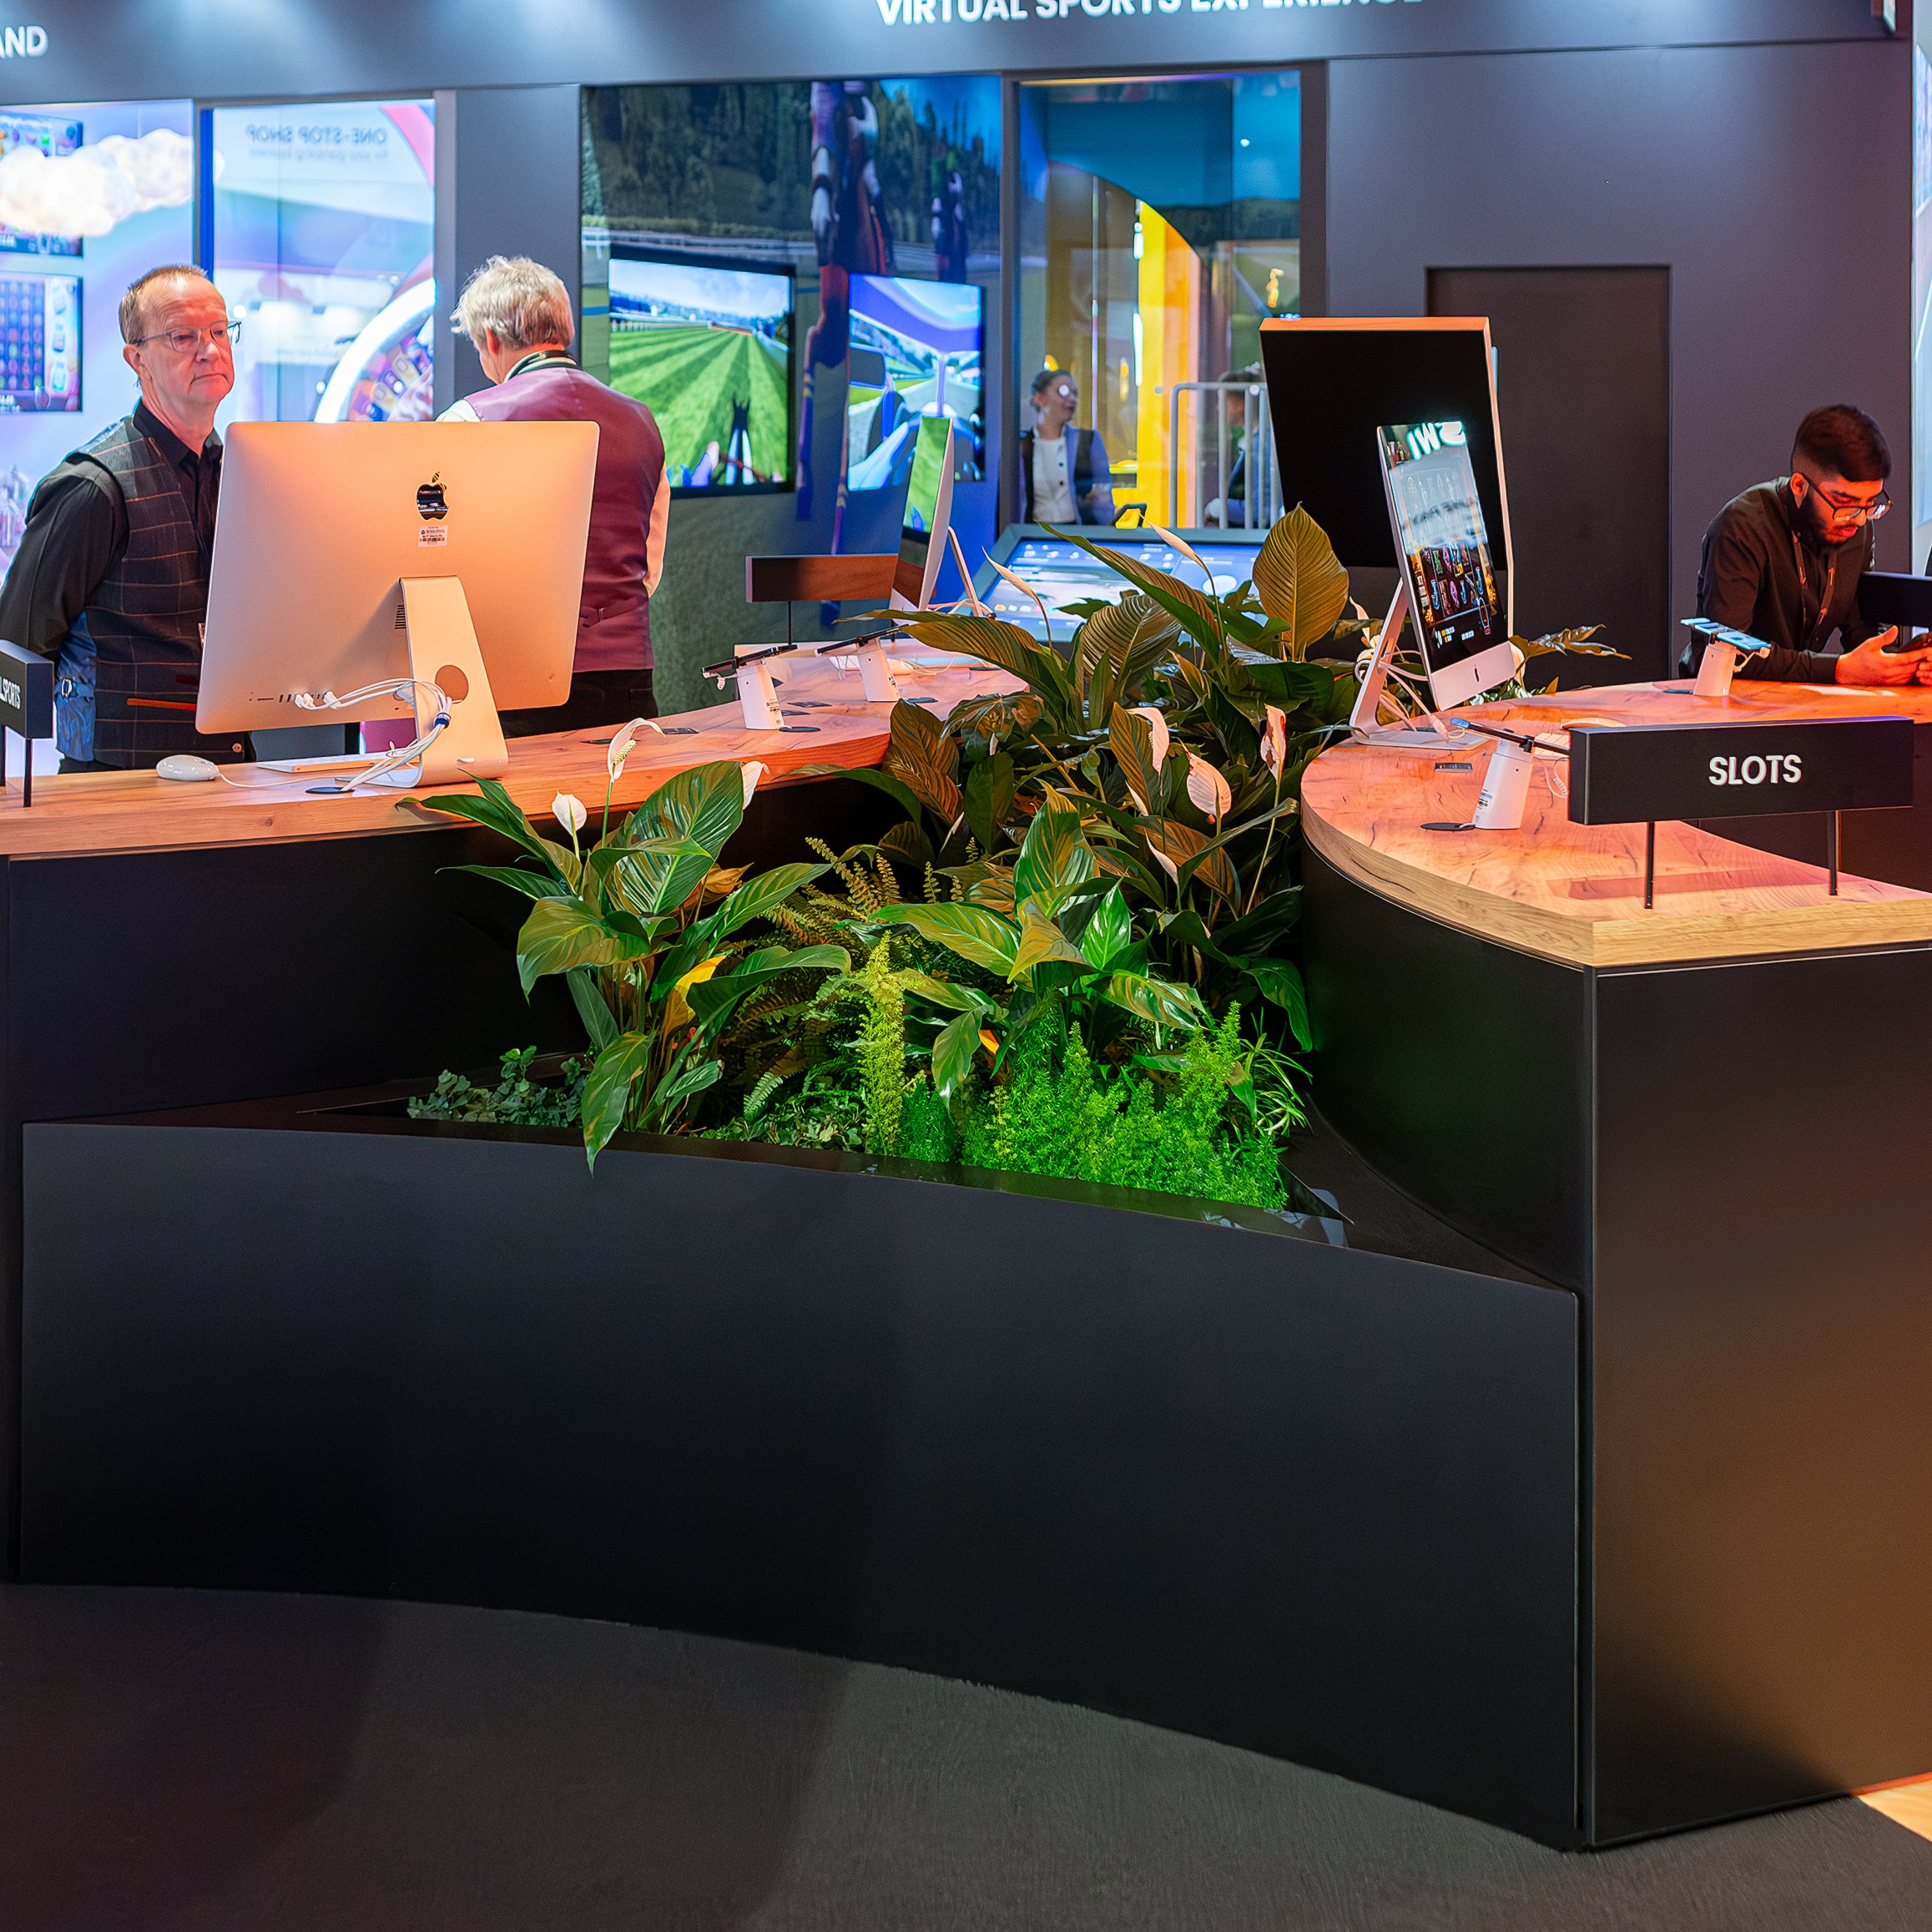 Amarante London Lush green plants decorate a sleek workspace at the ICE London Exhibition, offering a serenity amidst the buzz of virtual sports betting and gaming technology displays.